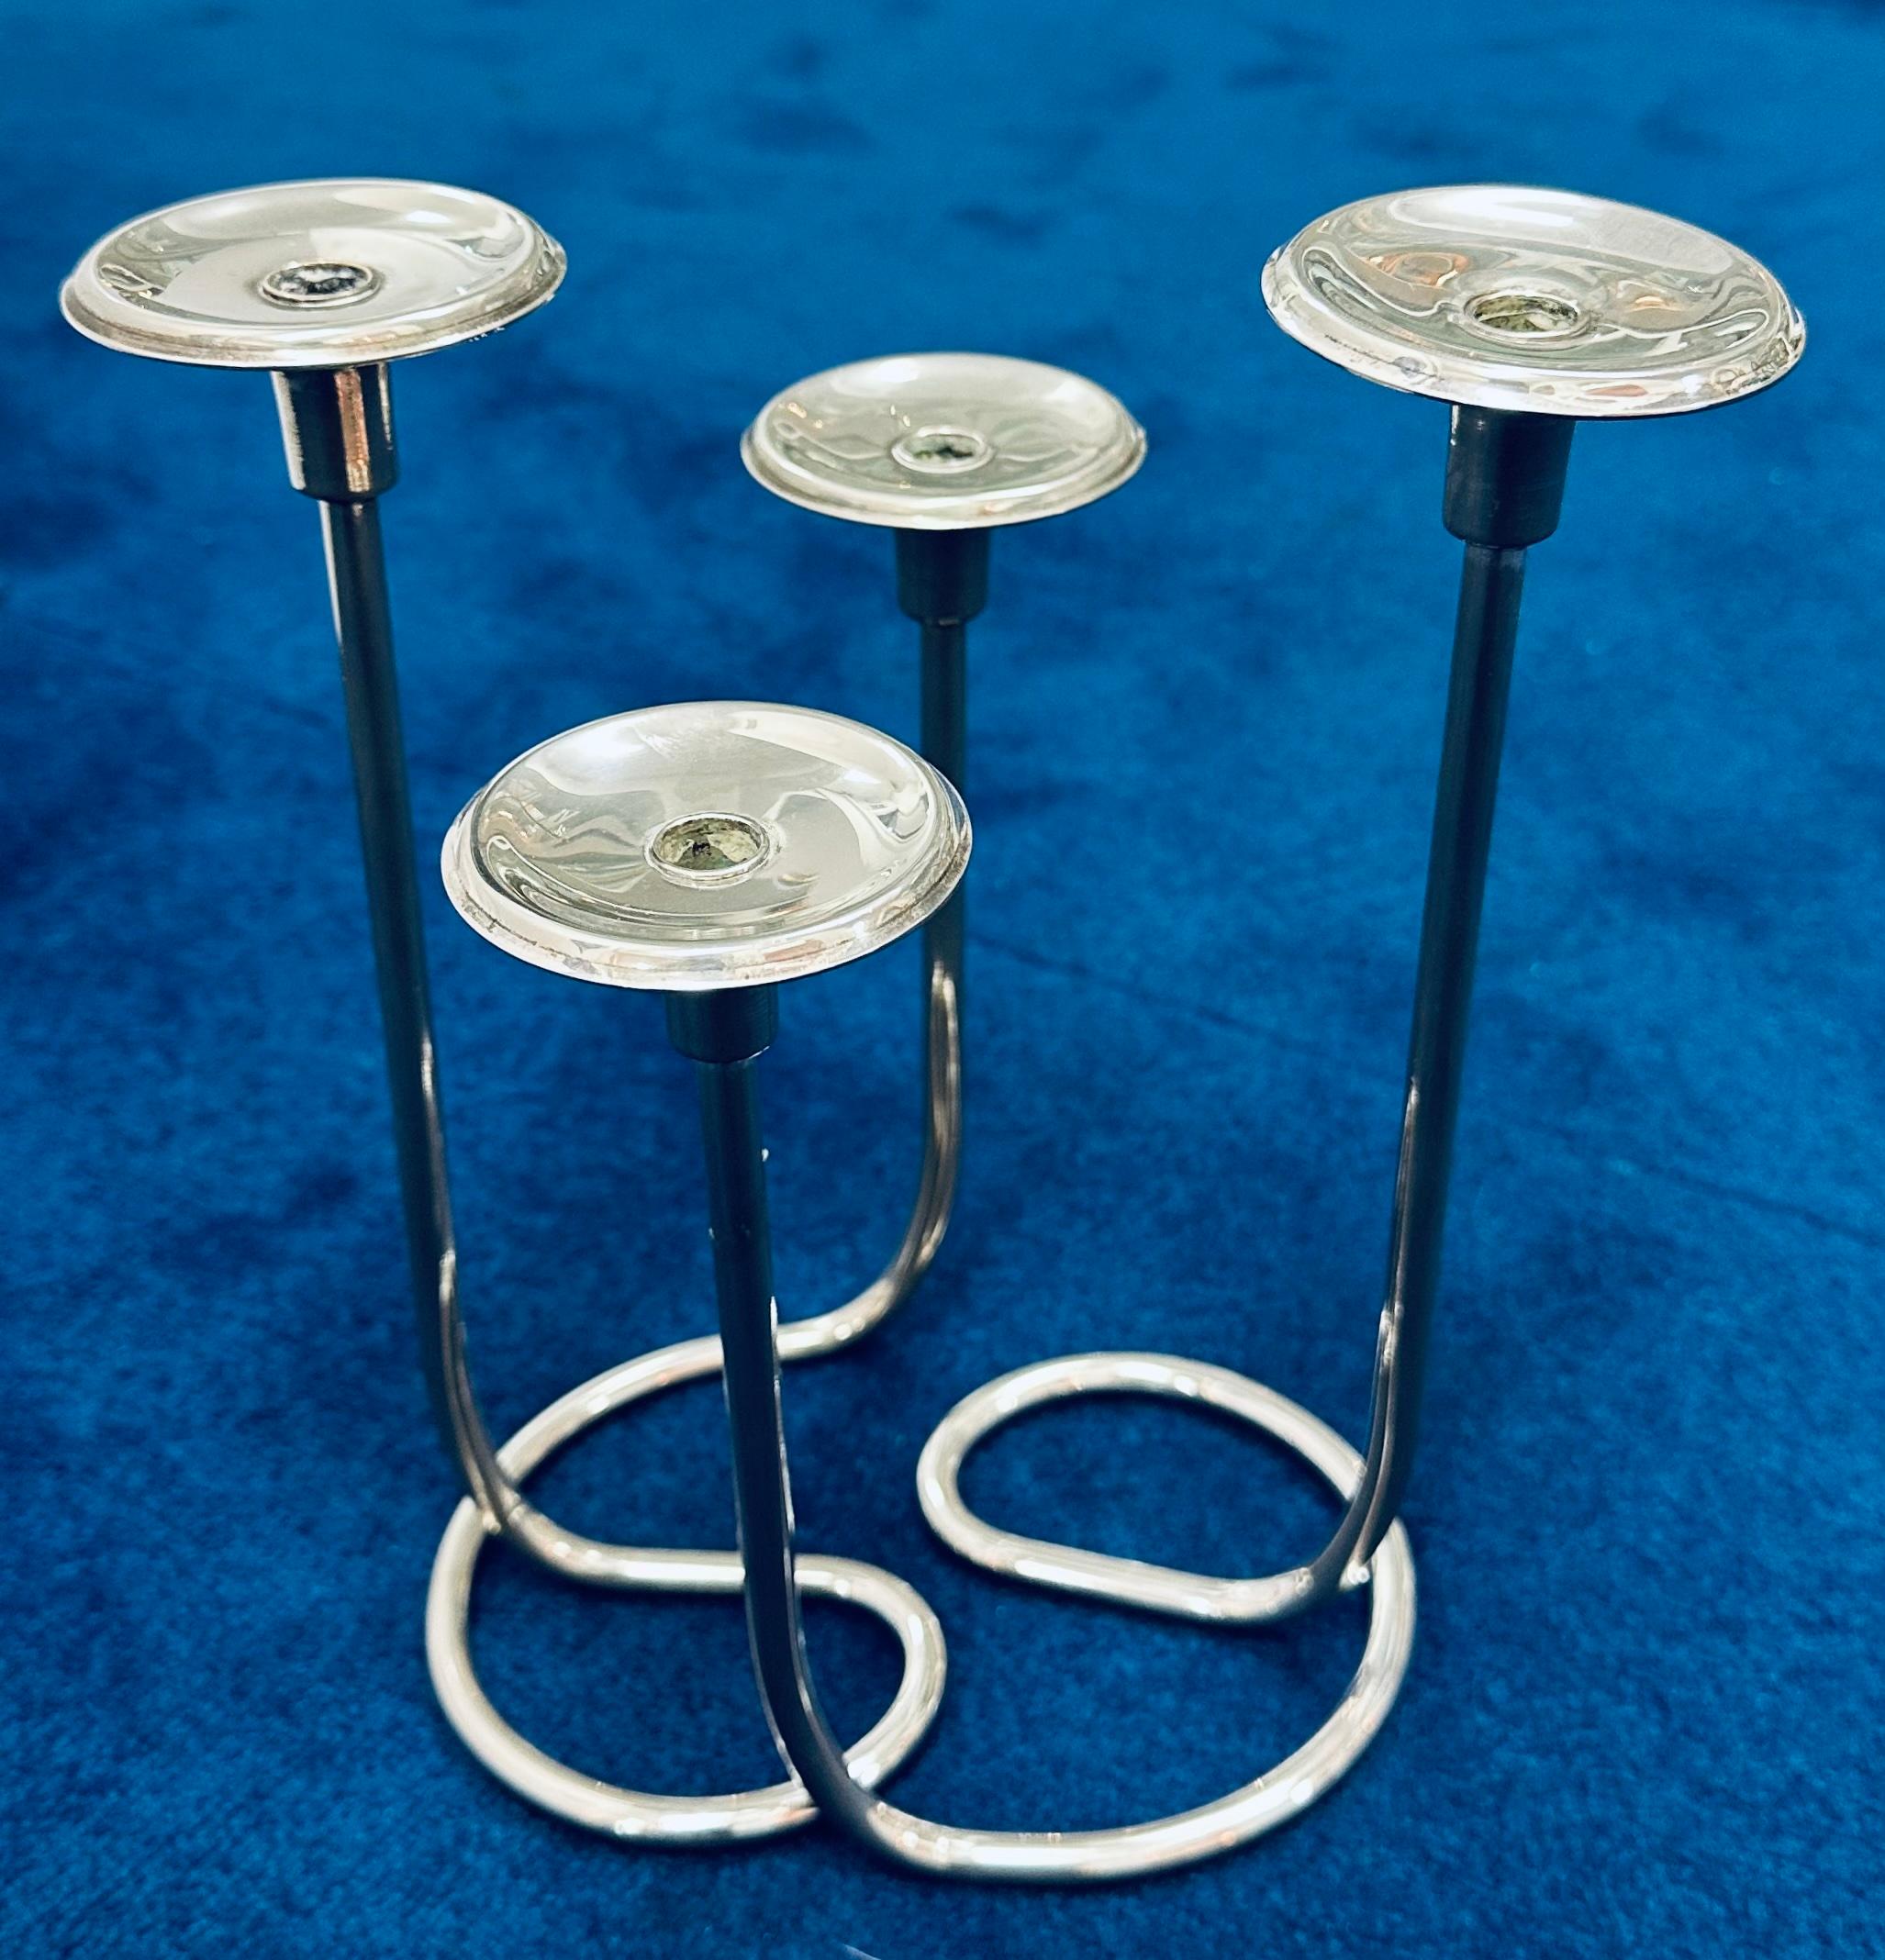 An unusual and playful pair of intertwining 1950s German silver-plate candleholders in the style of designer Wilhelm Wagenfeld.  A wonderfully simple modernist and minimalist design with each corresponding side interlocking to form a 4 stem holder